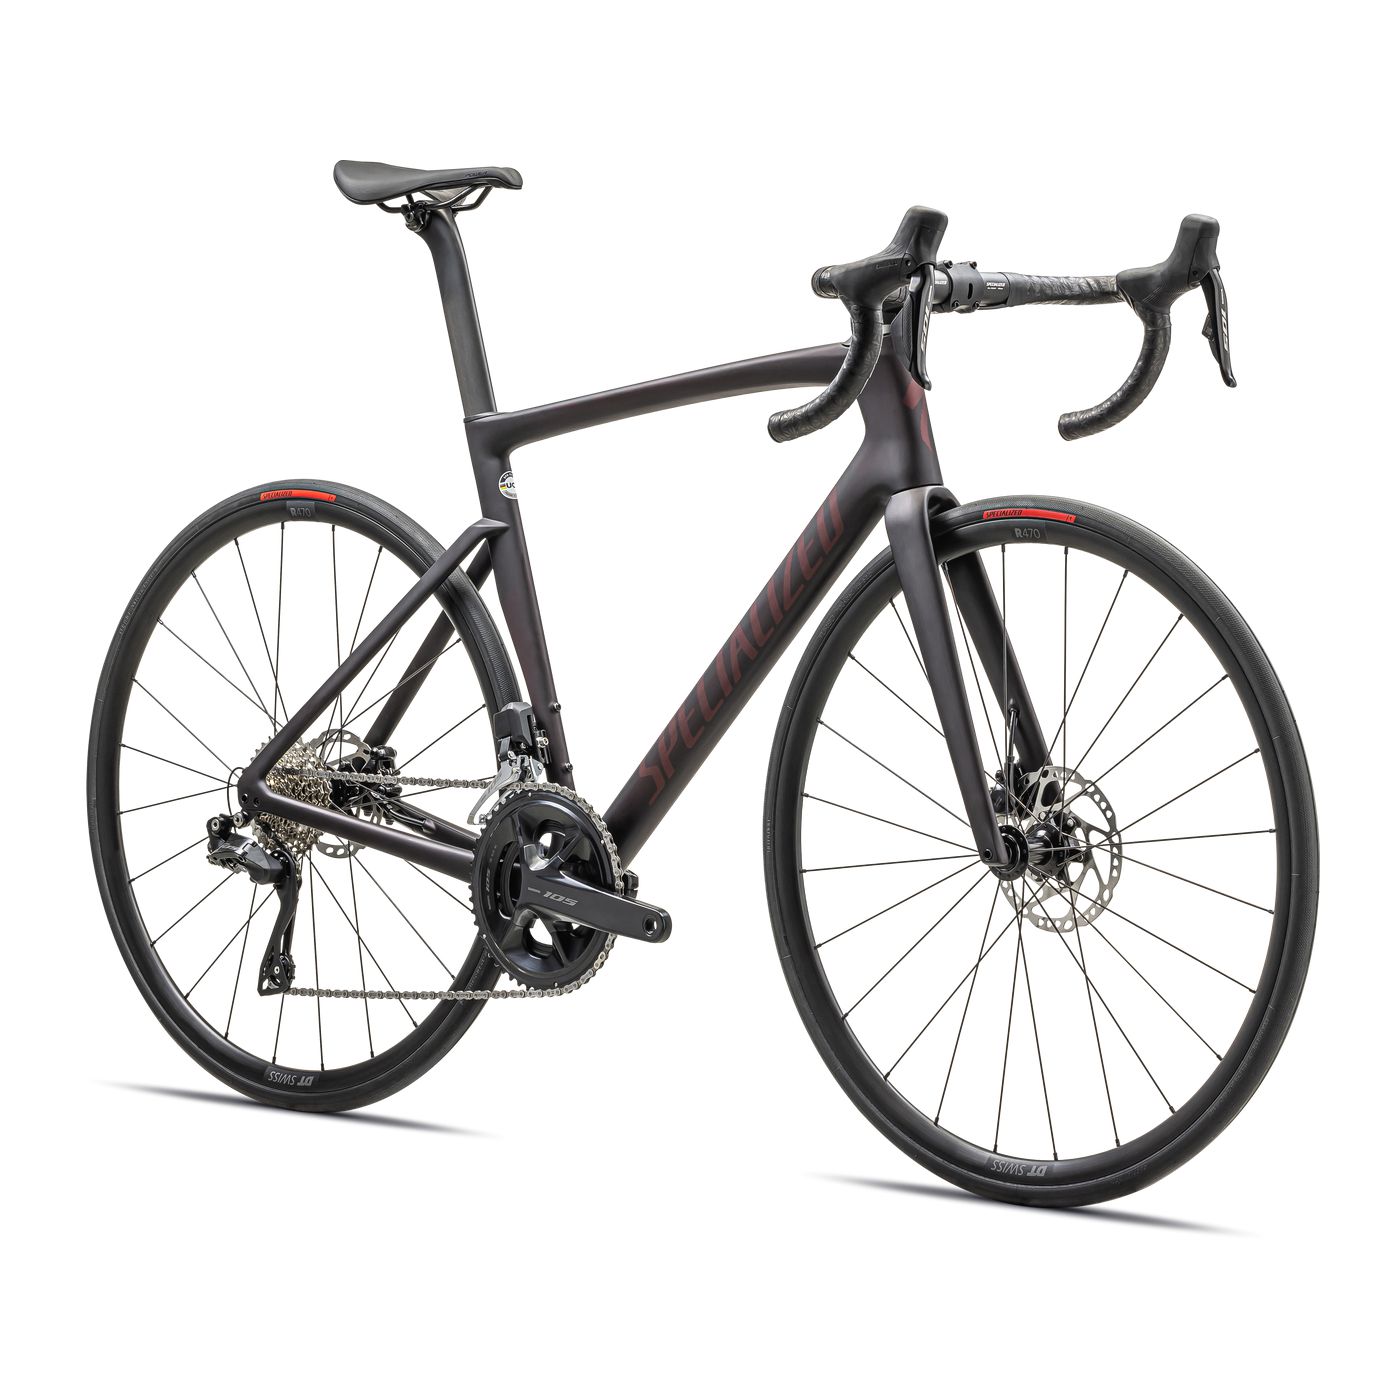 Specialized Tarmac SL7 Comp - Shimano 105 Di2 - Bikes - Road - Bicycle Warehouse